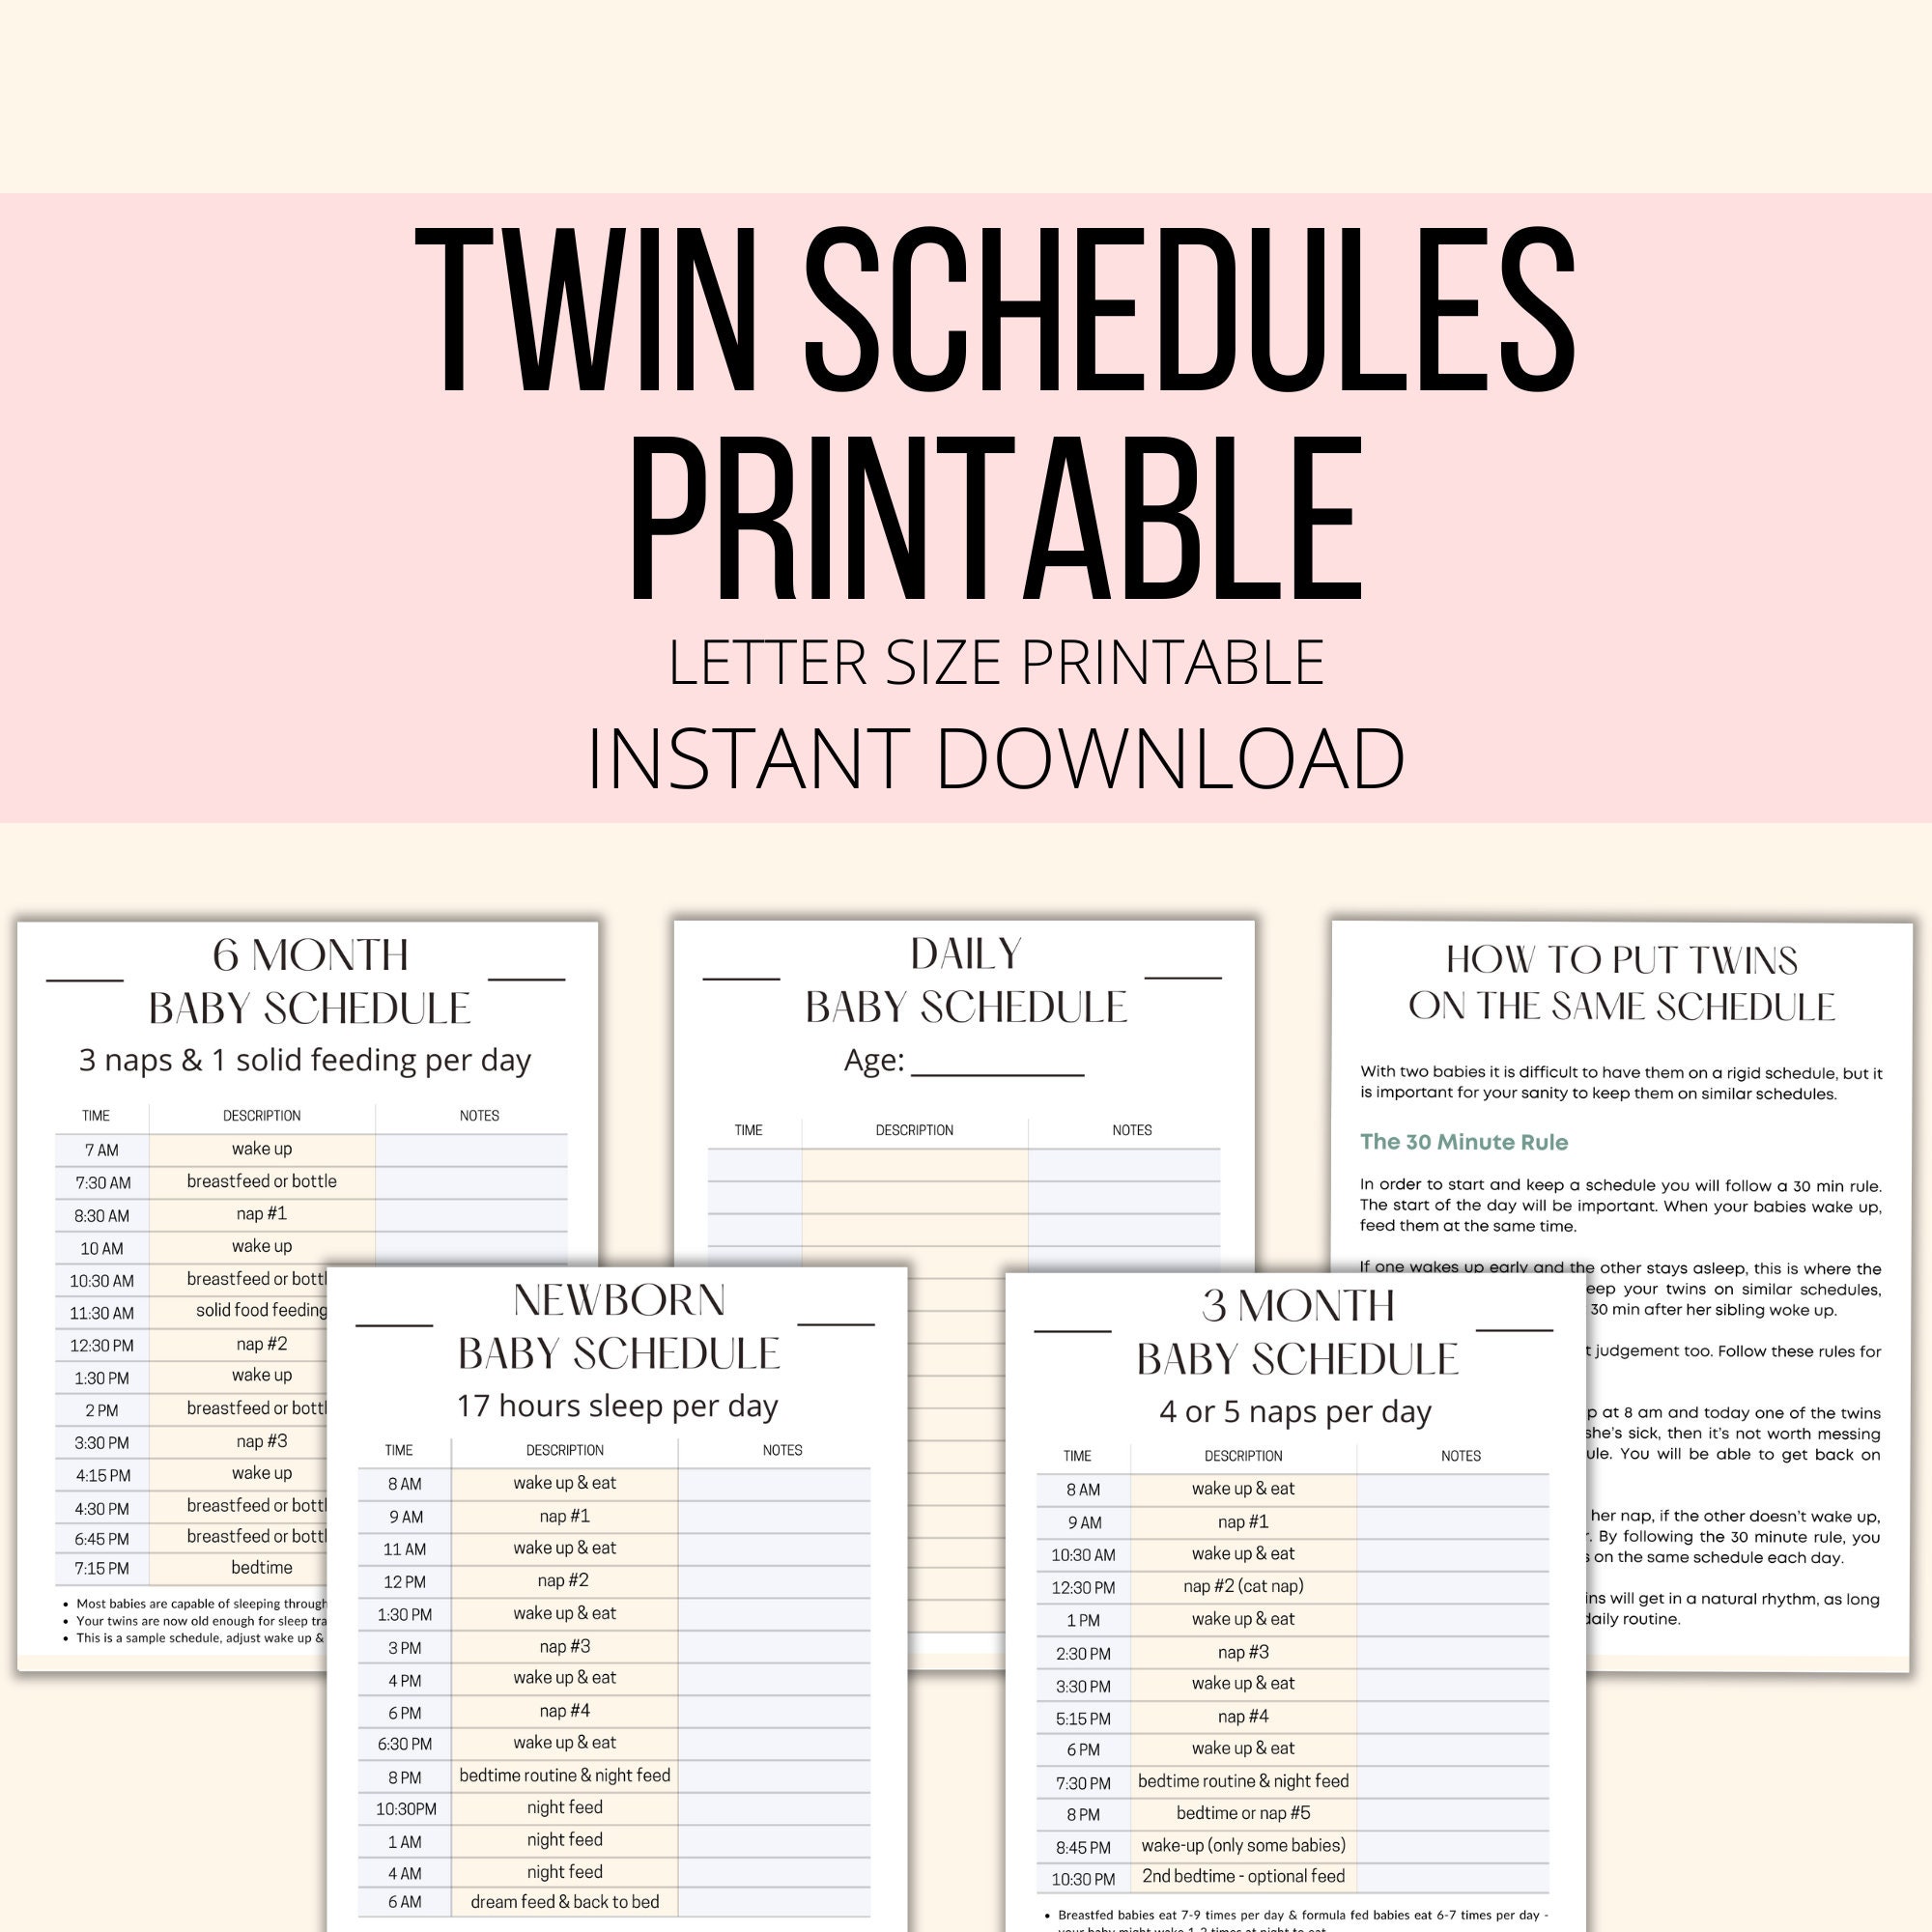 Twins Schedule Printable, Twin Schedules PDF, Twin Schedule Sheet, Twin